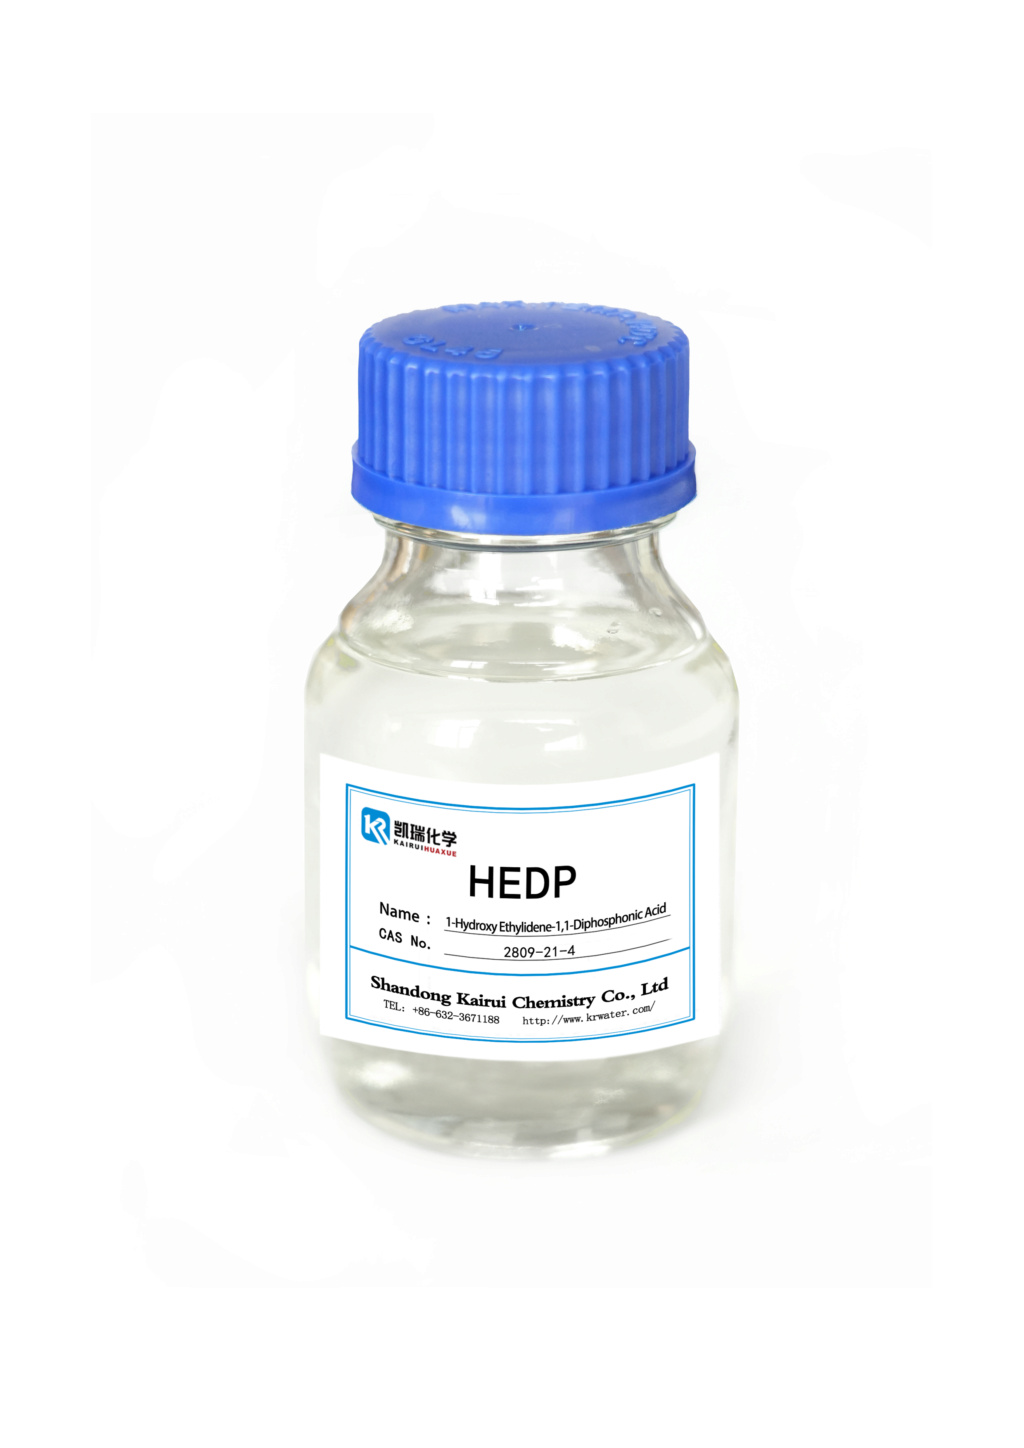 Does HEDP need to be used together with other chemical products? Hedp11